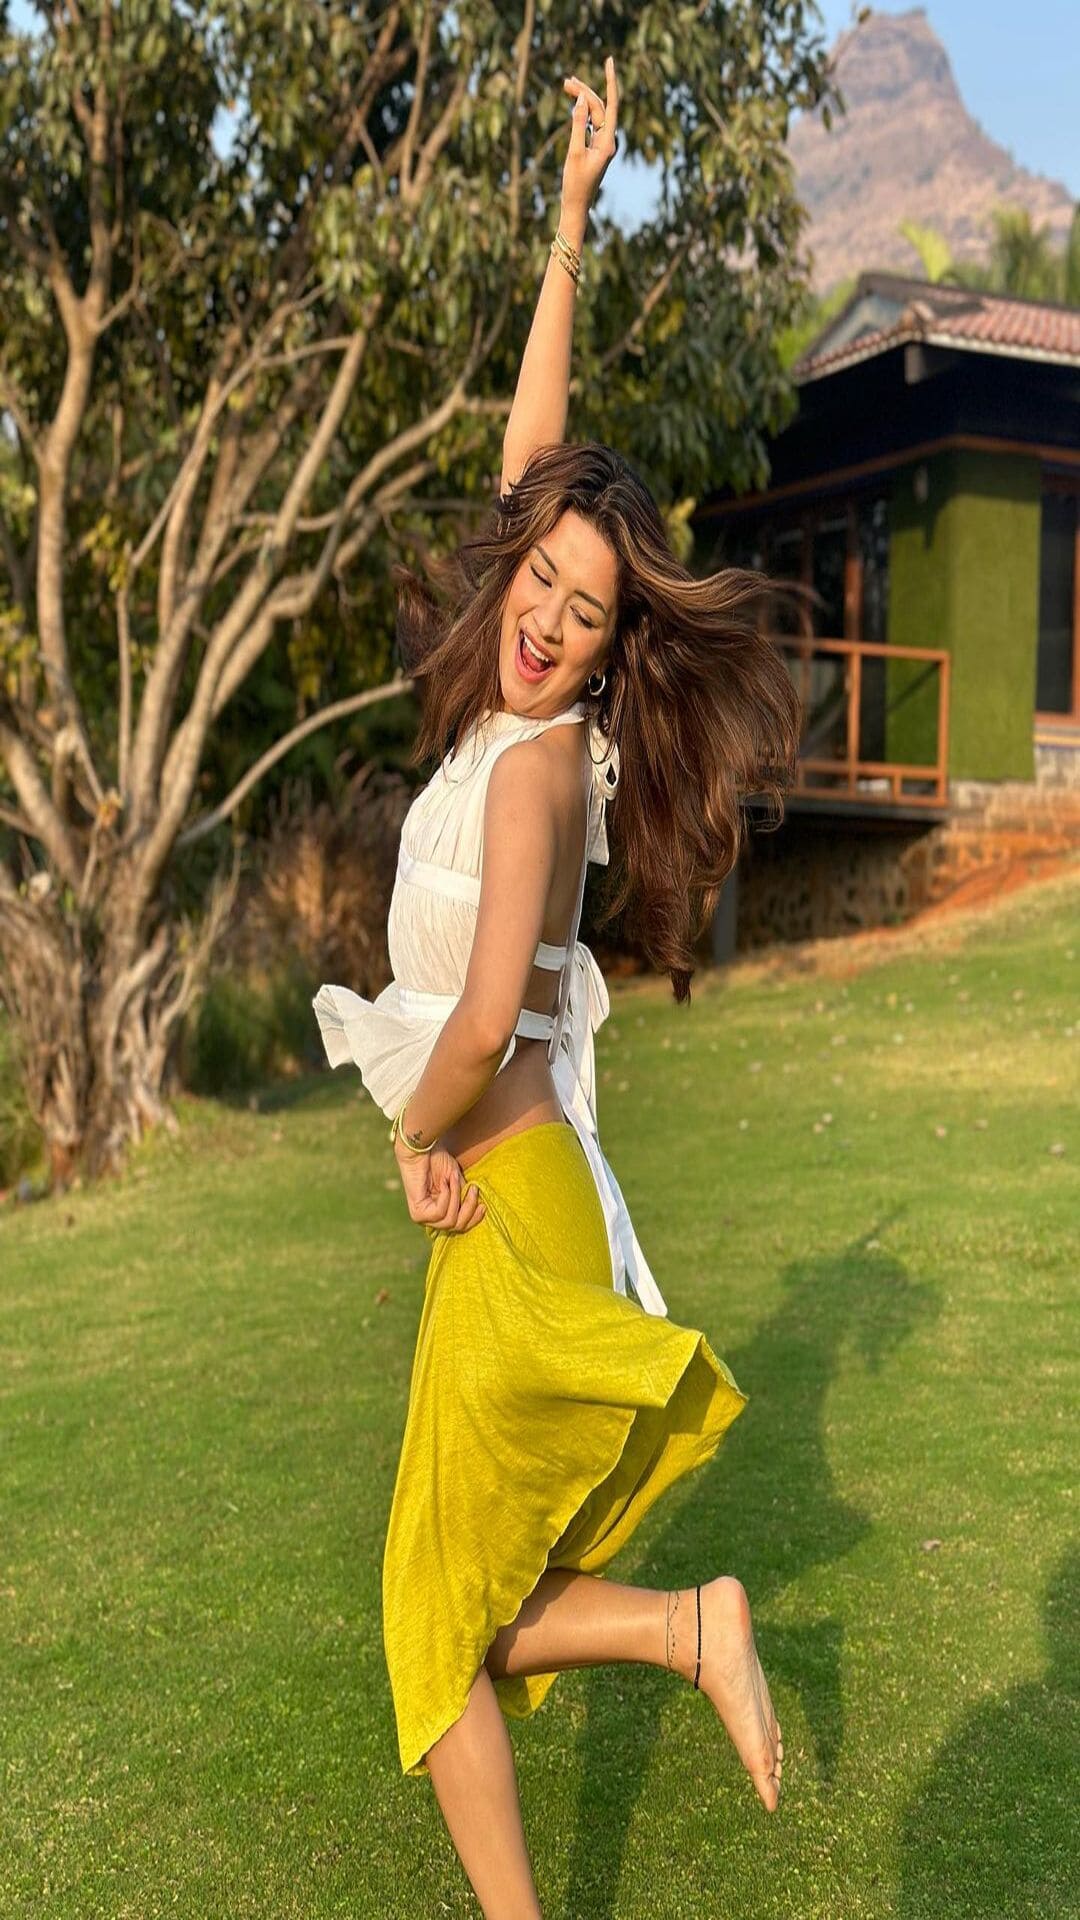 It's All About Backless: Take Cues From Avneet Kaur For Sultry Poses